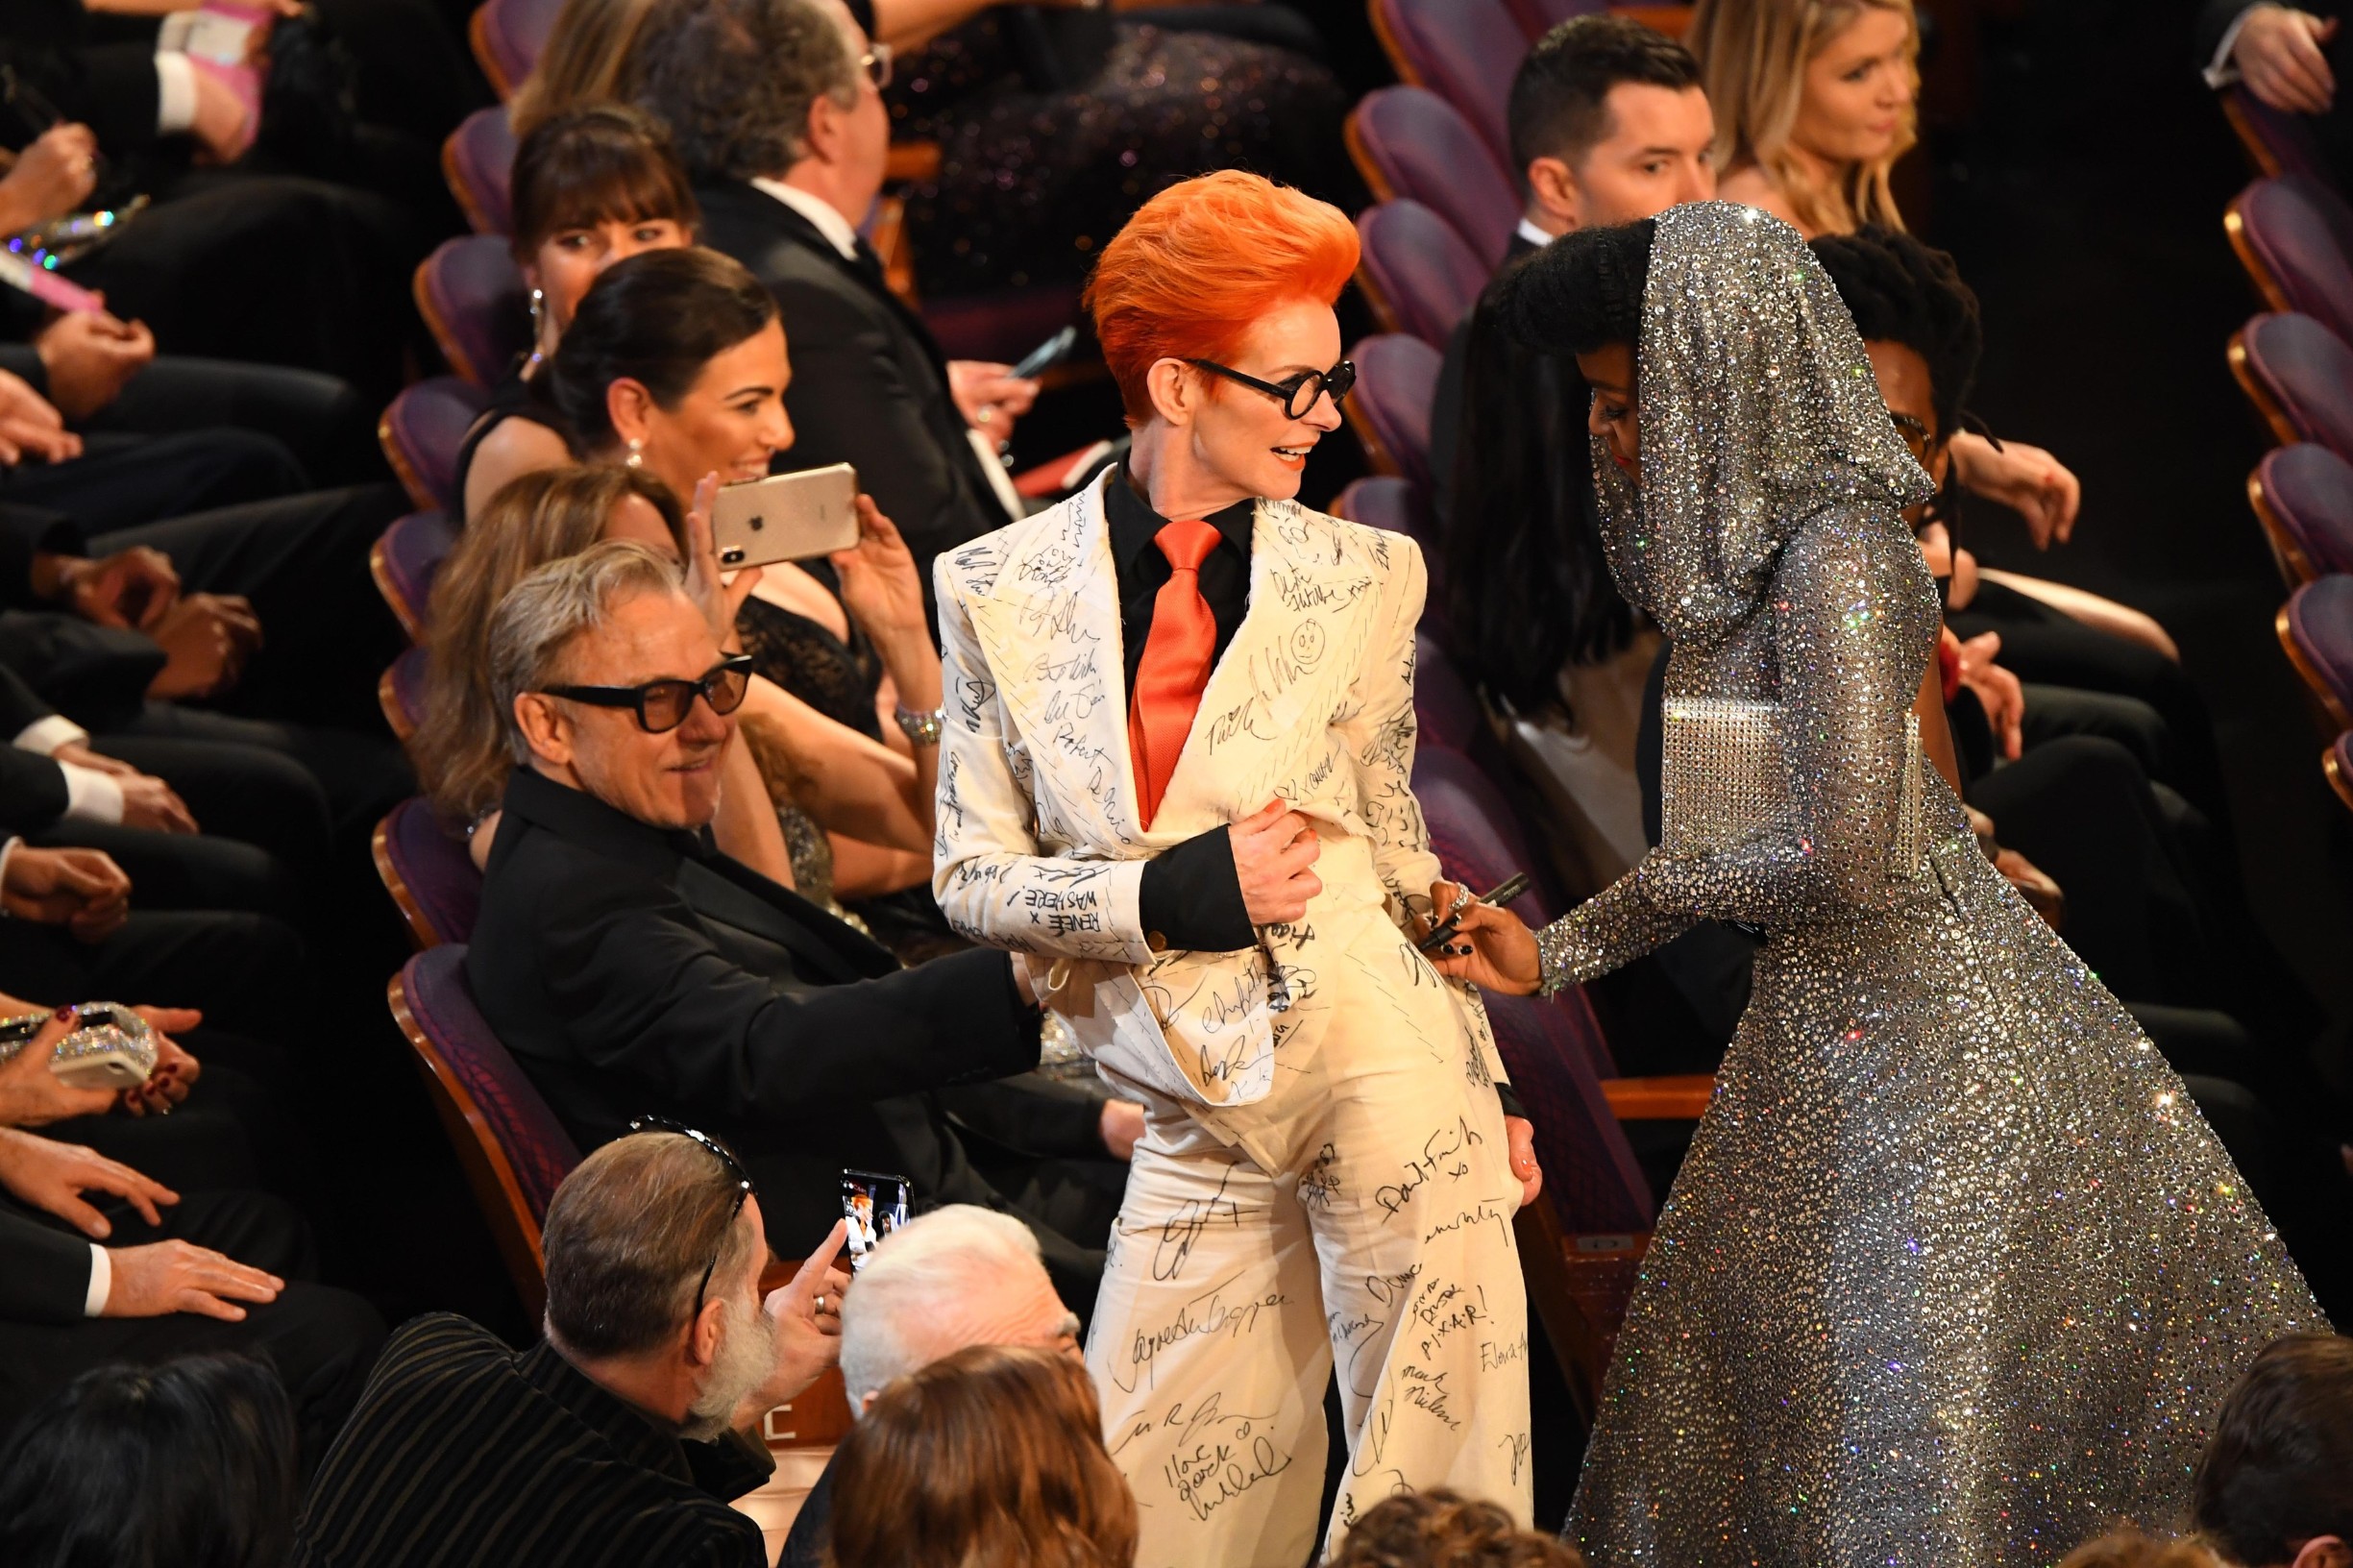 Feb 9, 2020; Los Angeles, CA, USA;   Janelle Monae (right) signs the suit of costume designer Sandy Powell during a break in the 92nd Academy Awards at Dolby Theatre., Image: 497502973, License: Rights-managed, Restrictions: *** World Rights ***, Model Release: no, Credit line: USA TODAY Network / ddp USA / Profimedia